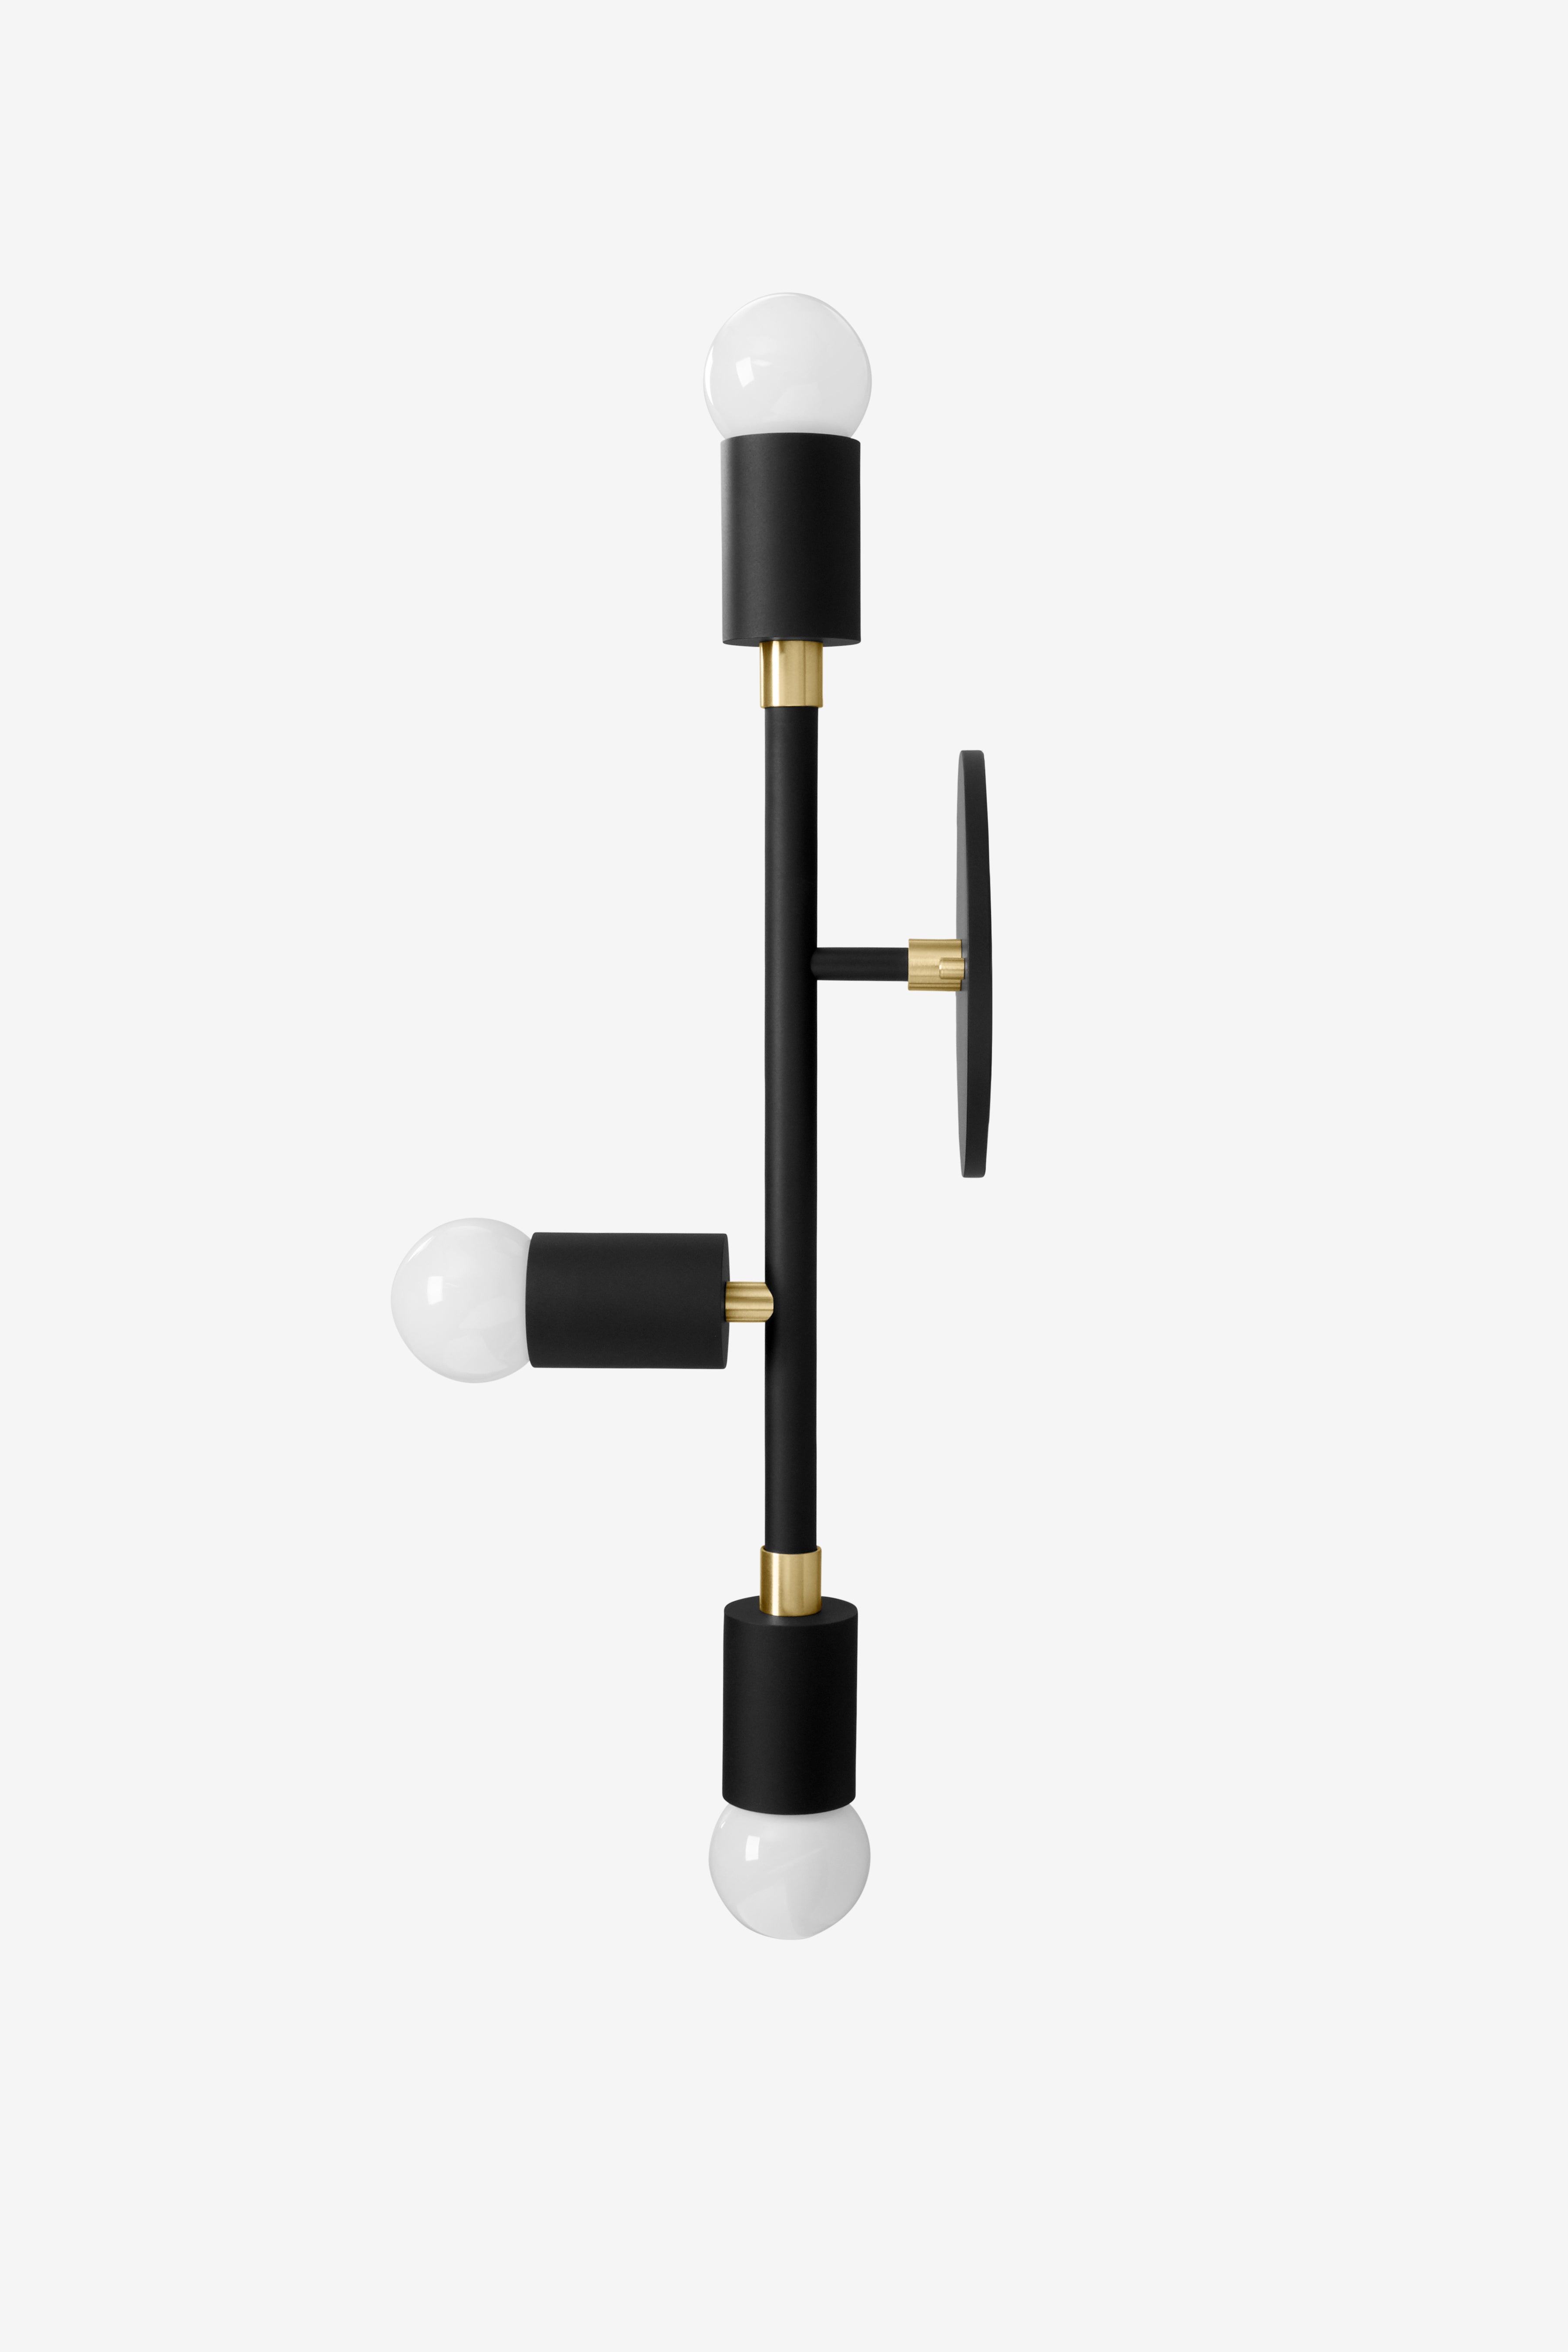 Tiburon Small / Sconce / Black and Brass